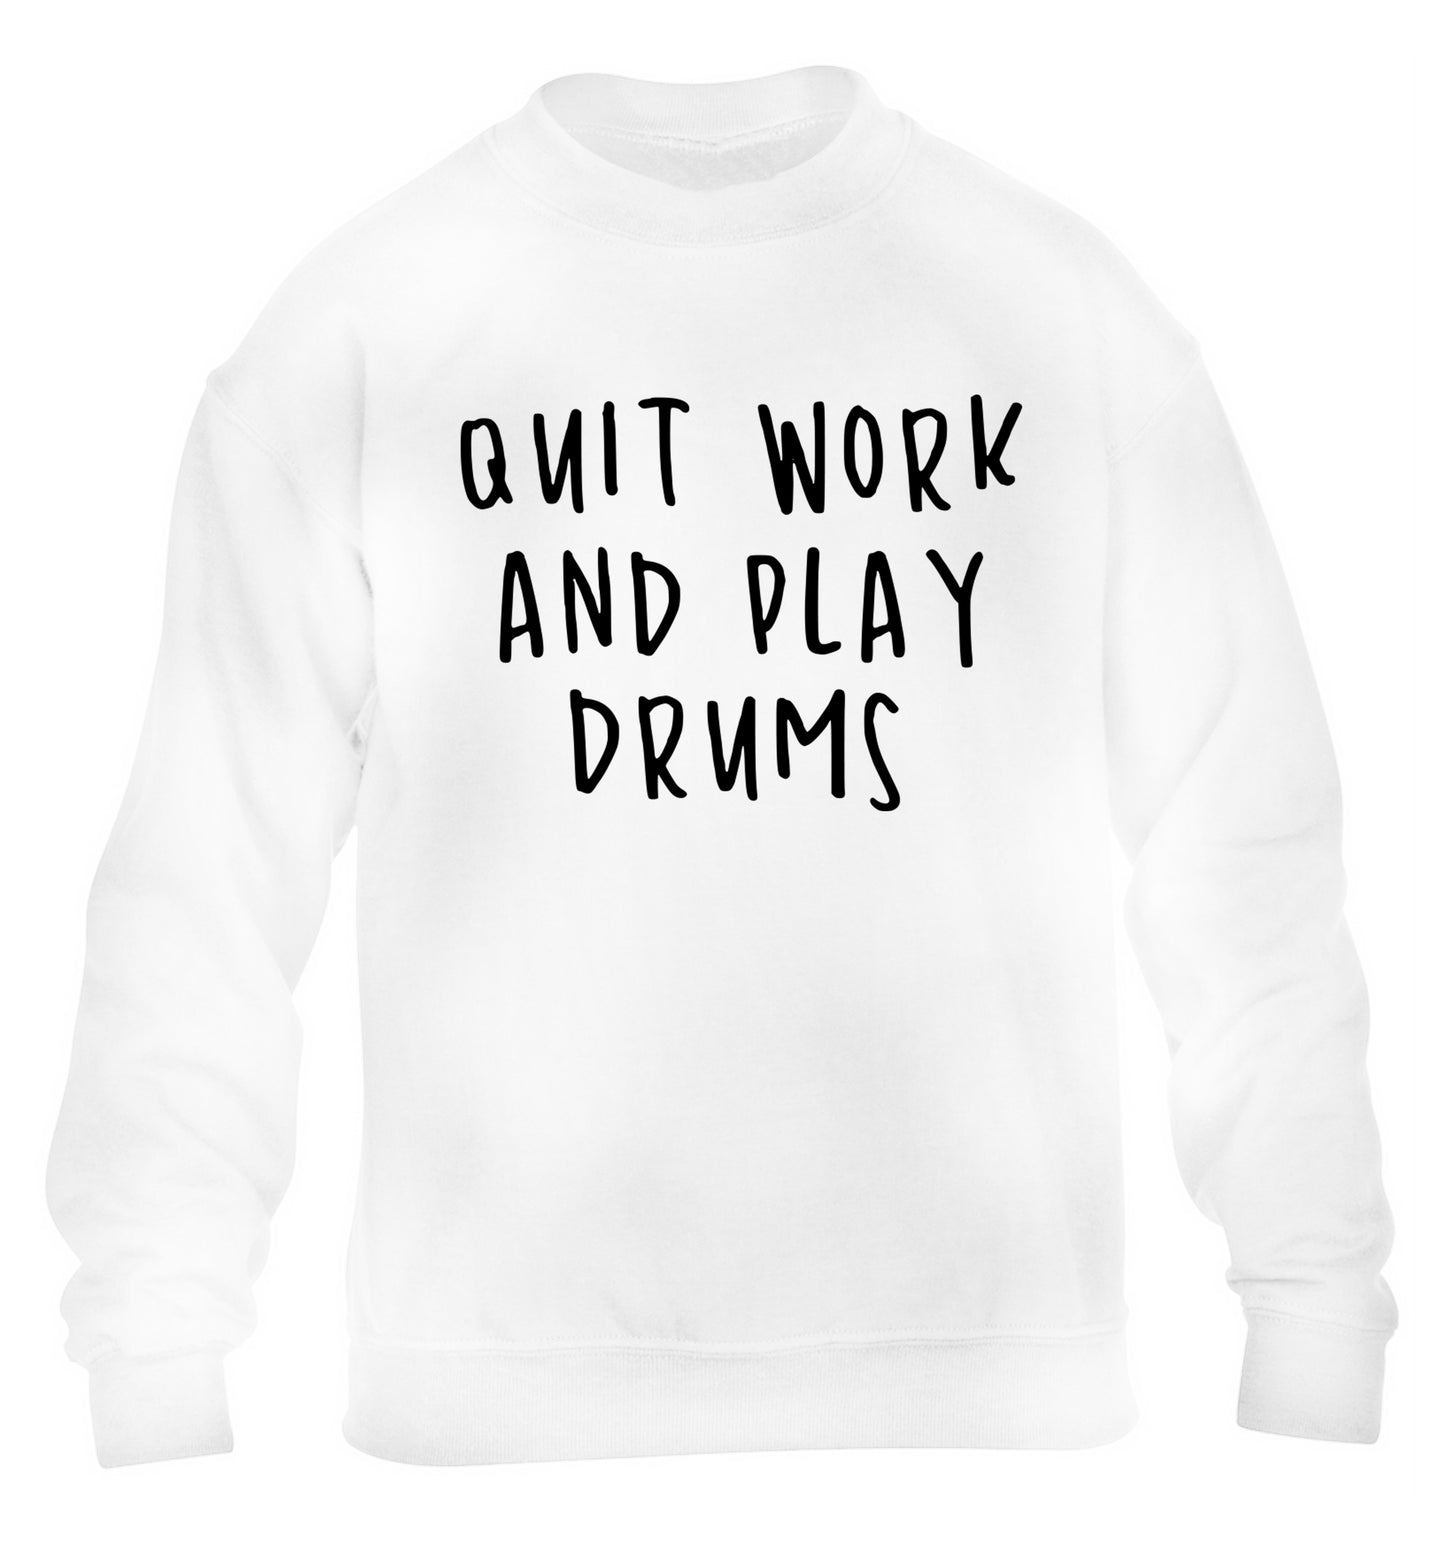 Quit work and play drums children's white sweater 12-14 Years